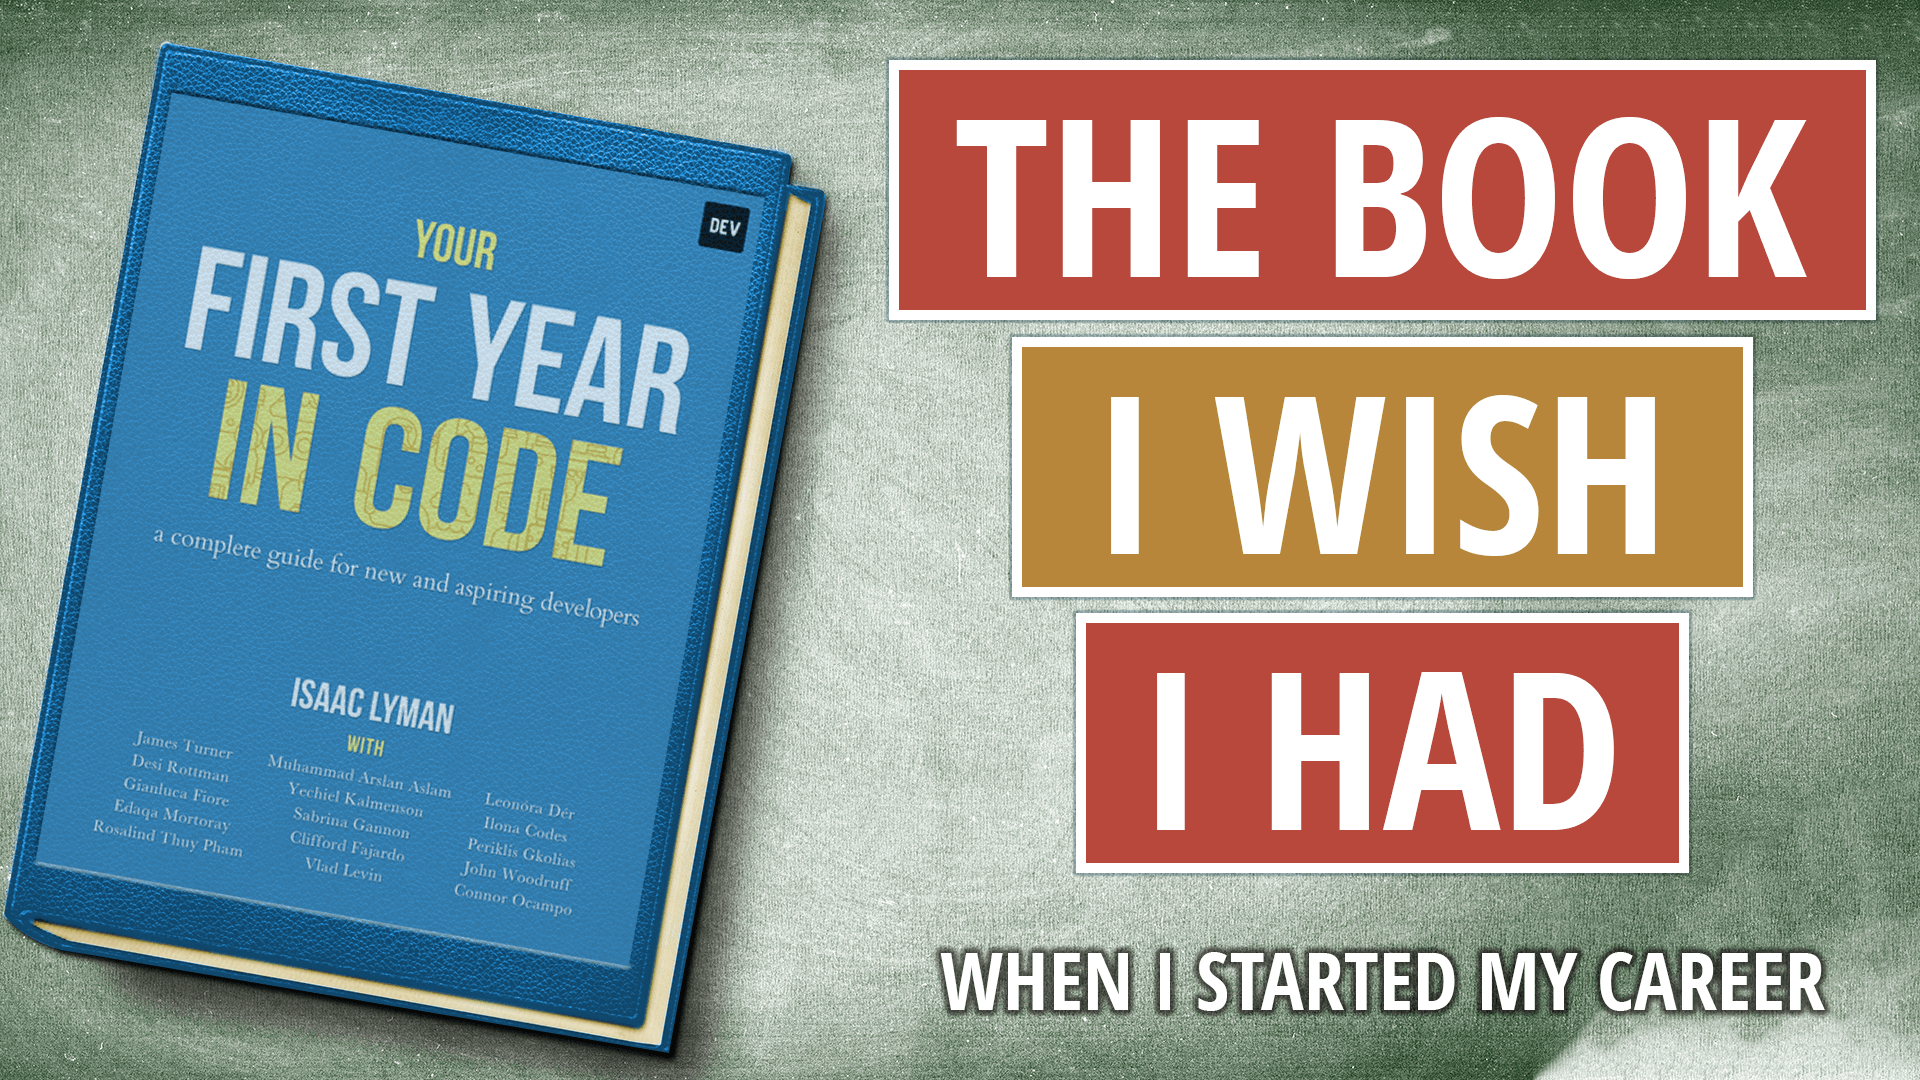 Your First Year in Code - a community book for new (and not so new) developers | Stories from the Developer Creator Club